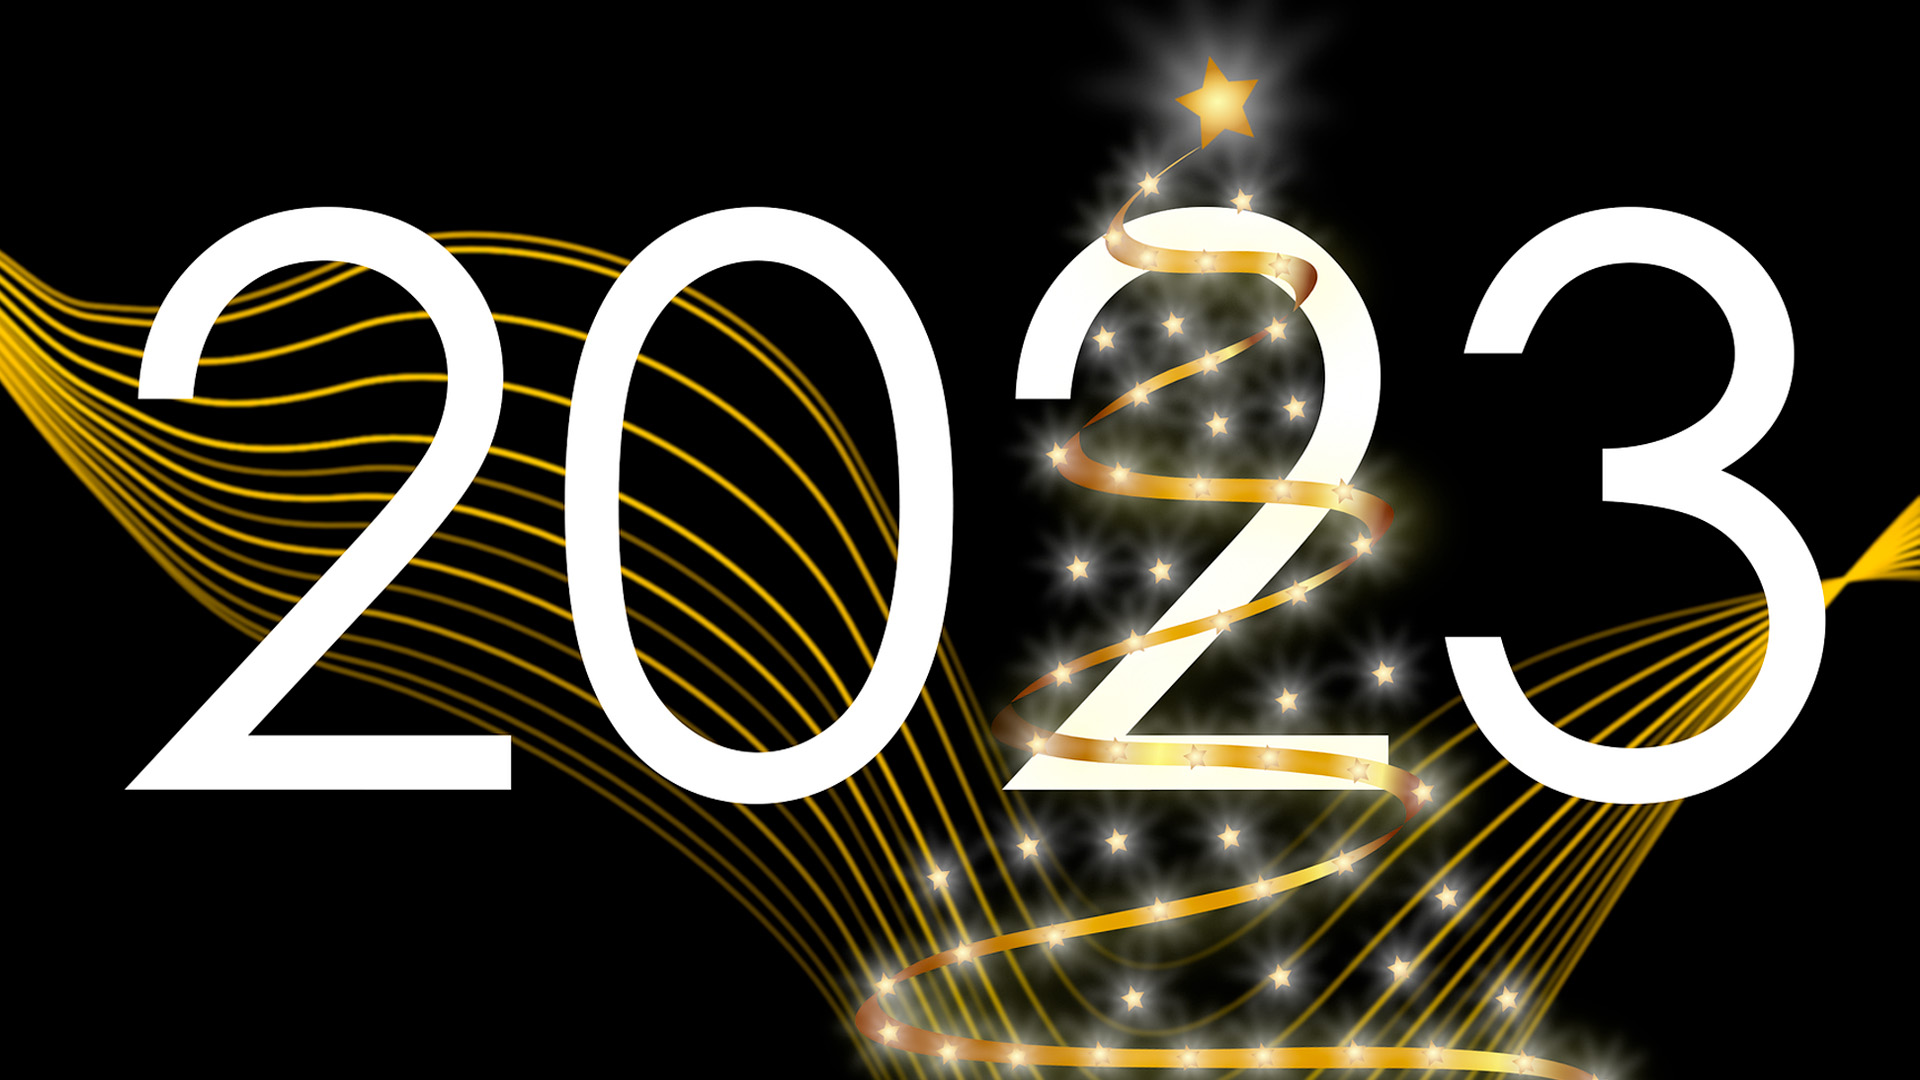 Black background with white 2023 text spanning out across the image. Gold abstract wave motion in the background with a gold ribbon zigzag tree across the second 2.